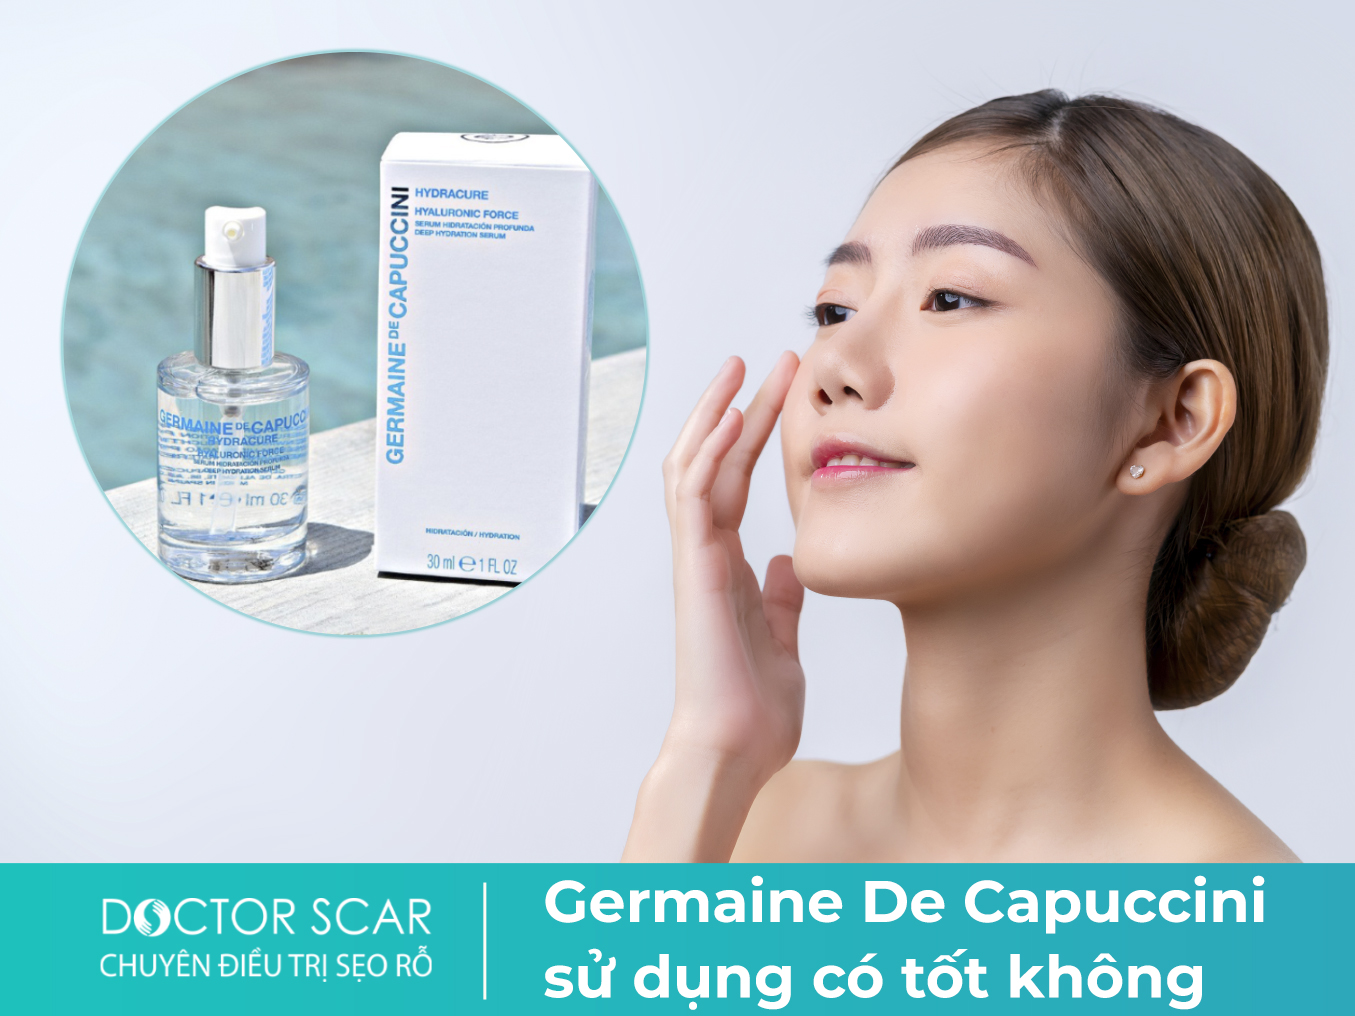 Germaine De Capuccini Hydracure Hyaluronic Force có tốt không